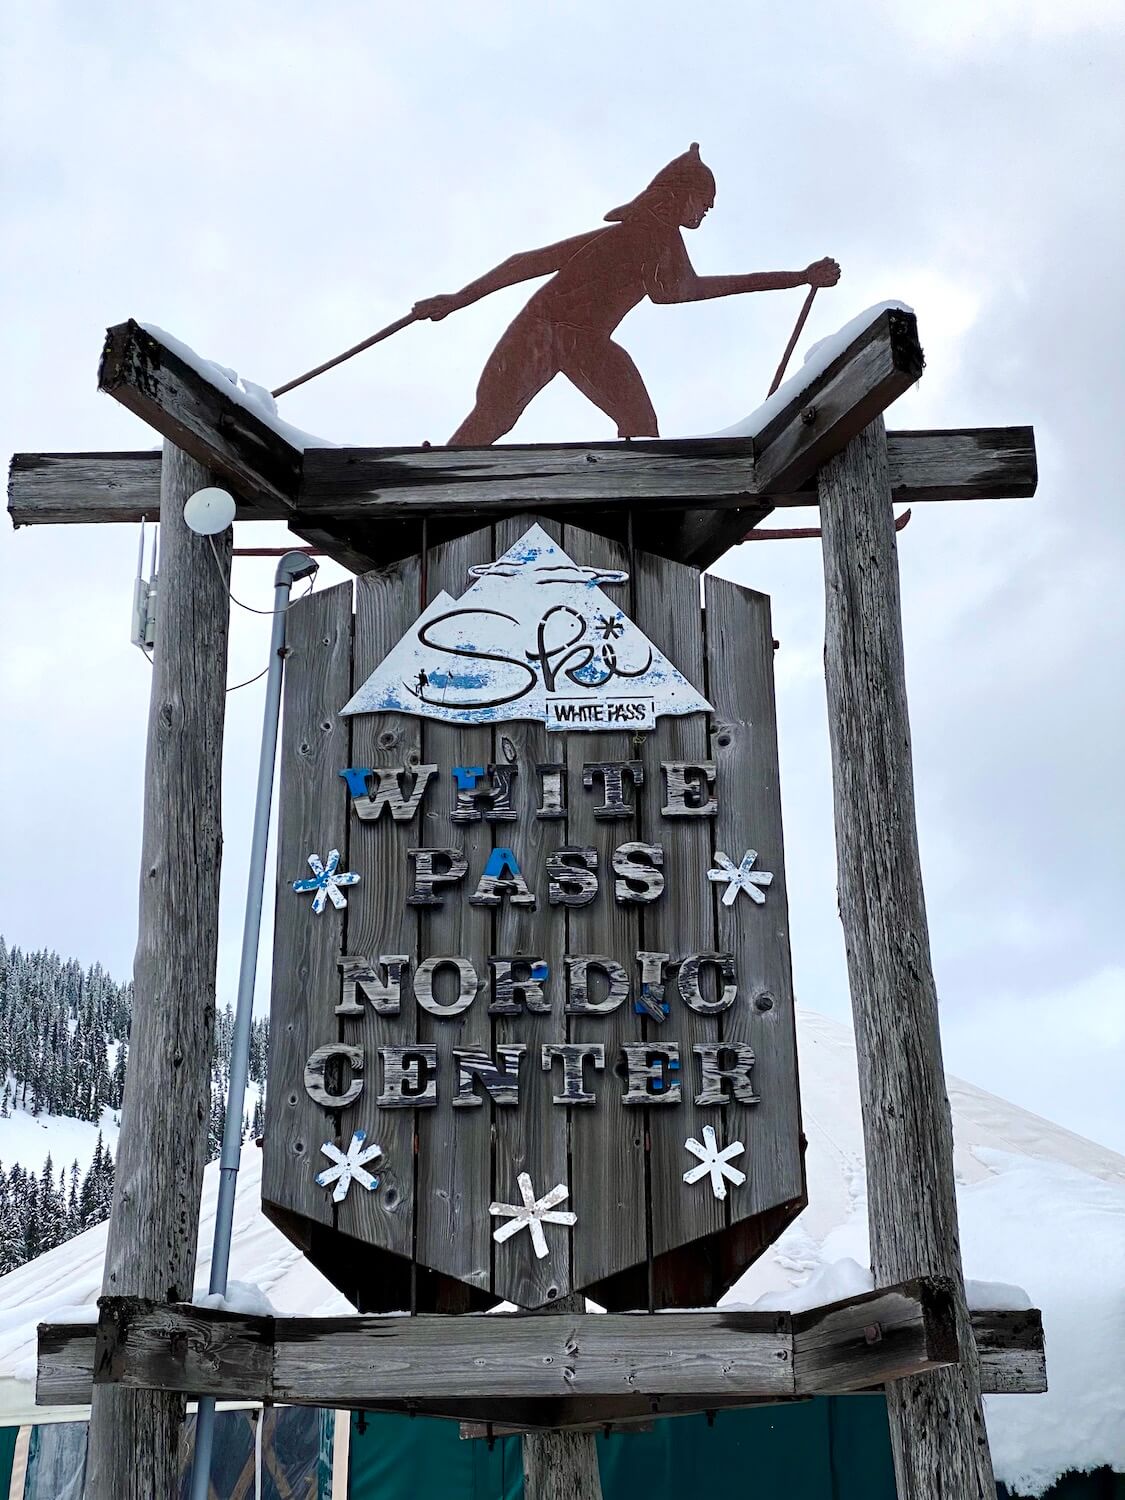 The rustic faded wood sign for White Pass Nordic Center, with gray weathered boards and the outline of a cross country skier on top.  In the back is the yurt.  